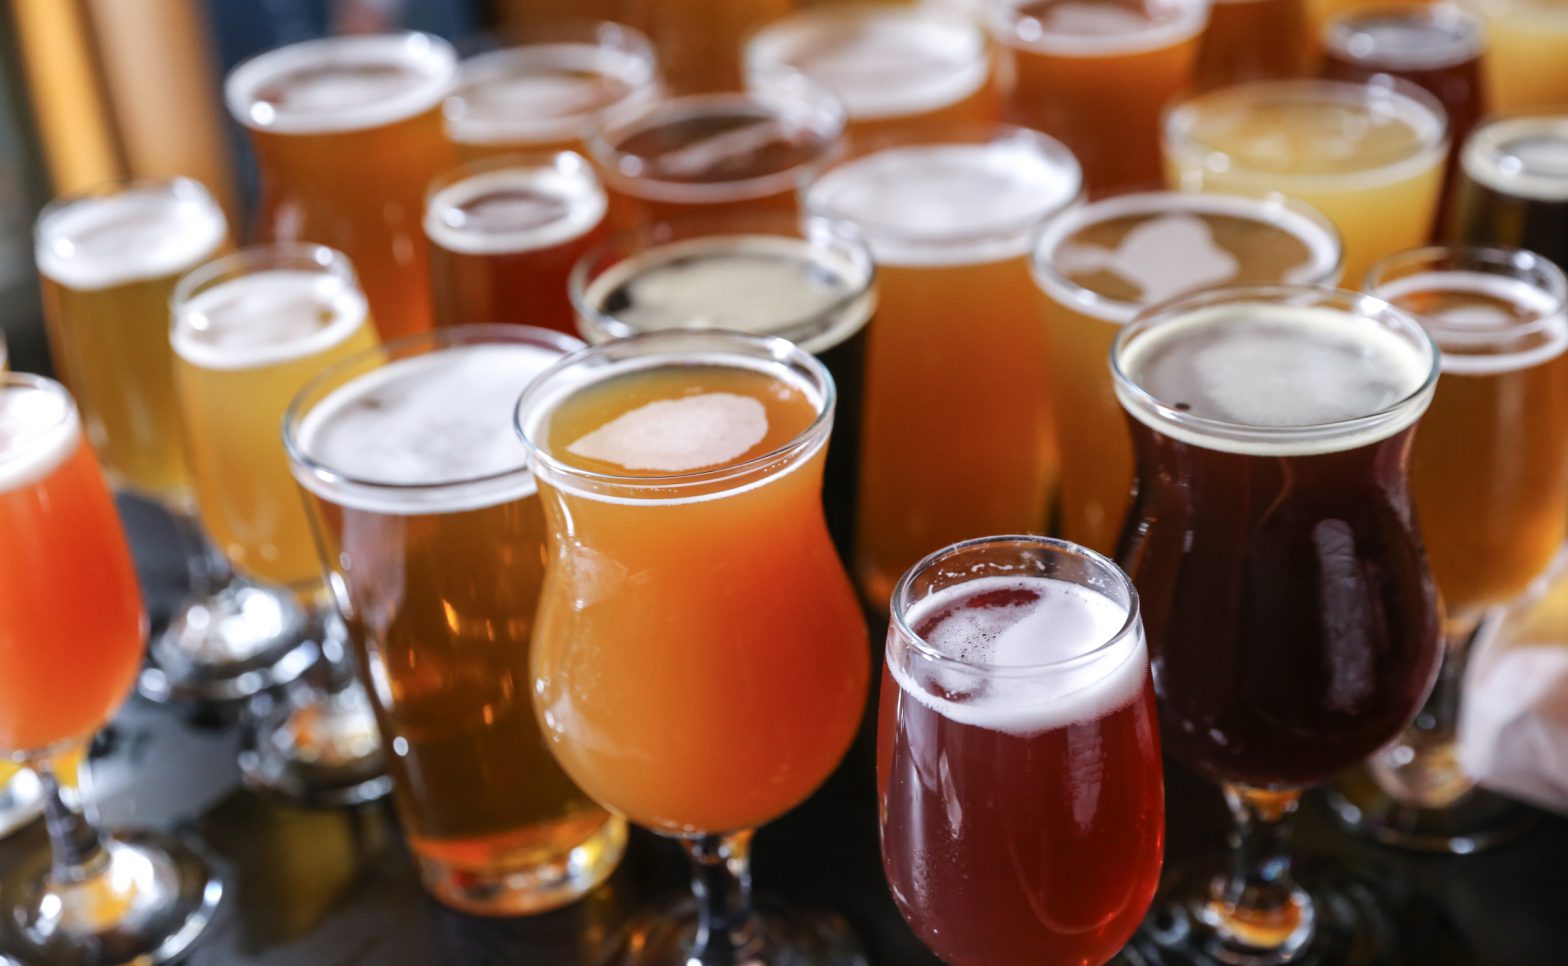 Four Key Ways Craft Breweries Can Increase Market Visibility